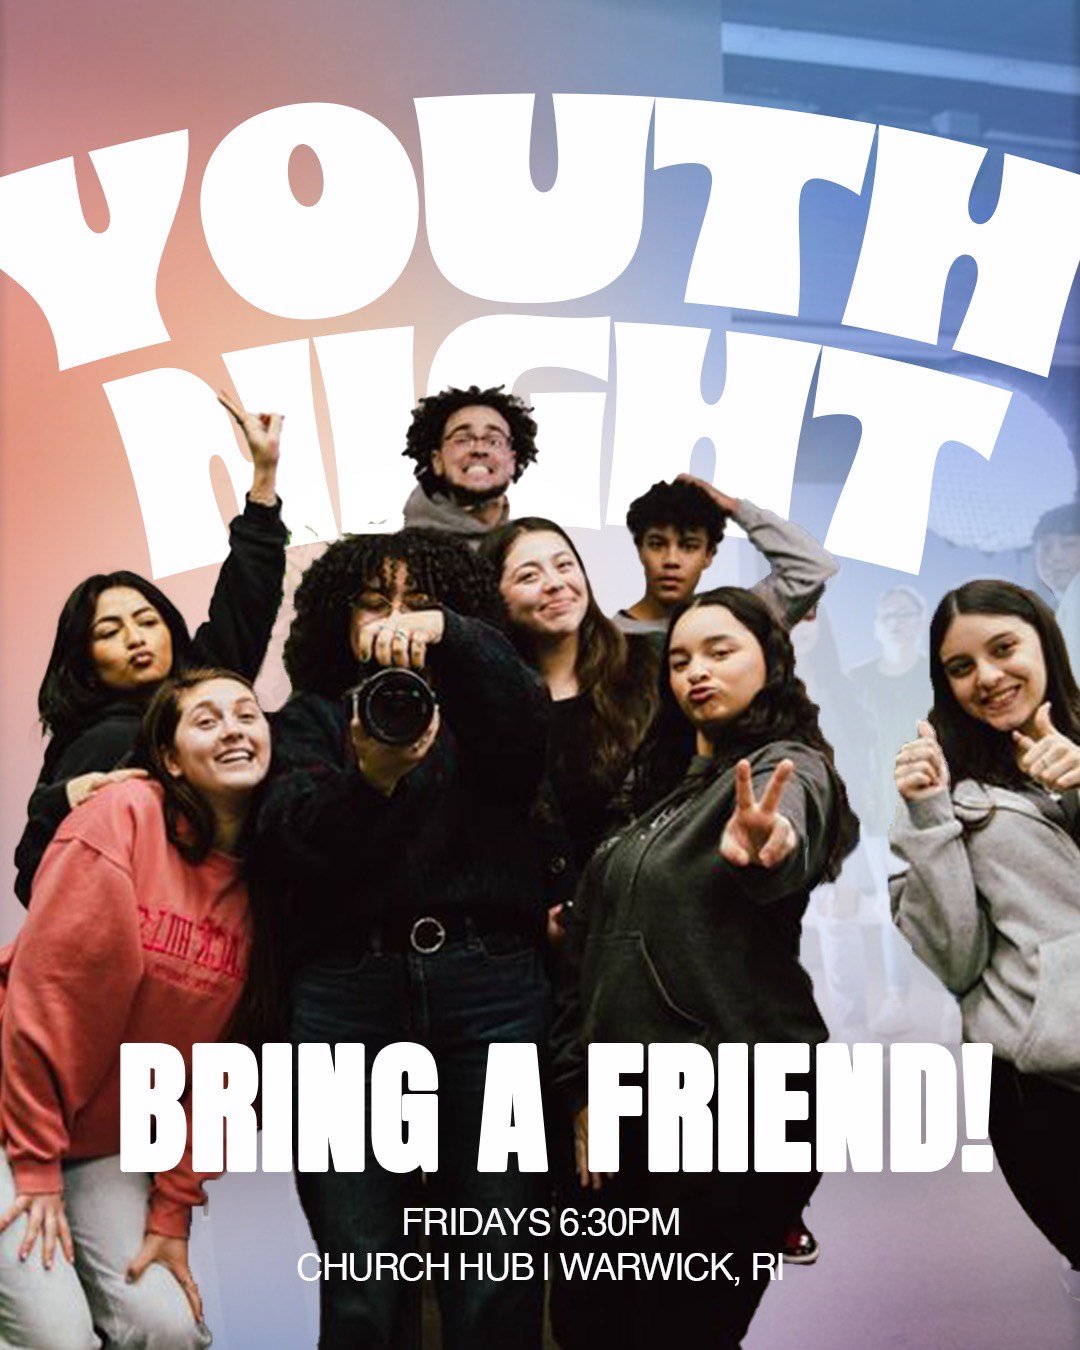 Tonight is Youth Night🙌 we will continue our &quot;Life or Death&quot; series with crews!!

You don't want to miss it😎

6:30PM | Ages: 12-19 yrs old
Meeting at the Church Hub
Warwick, RI